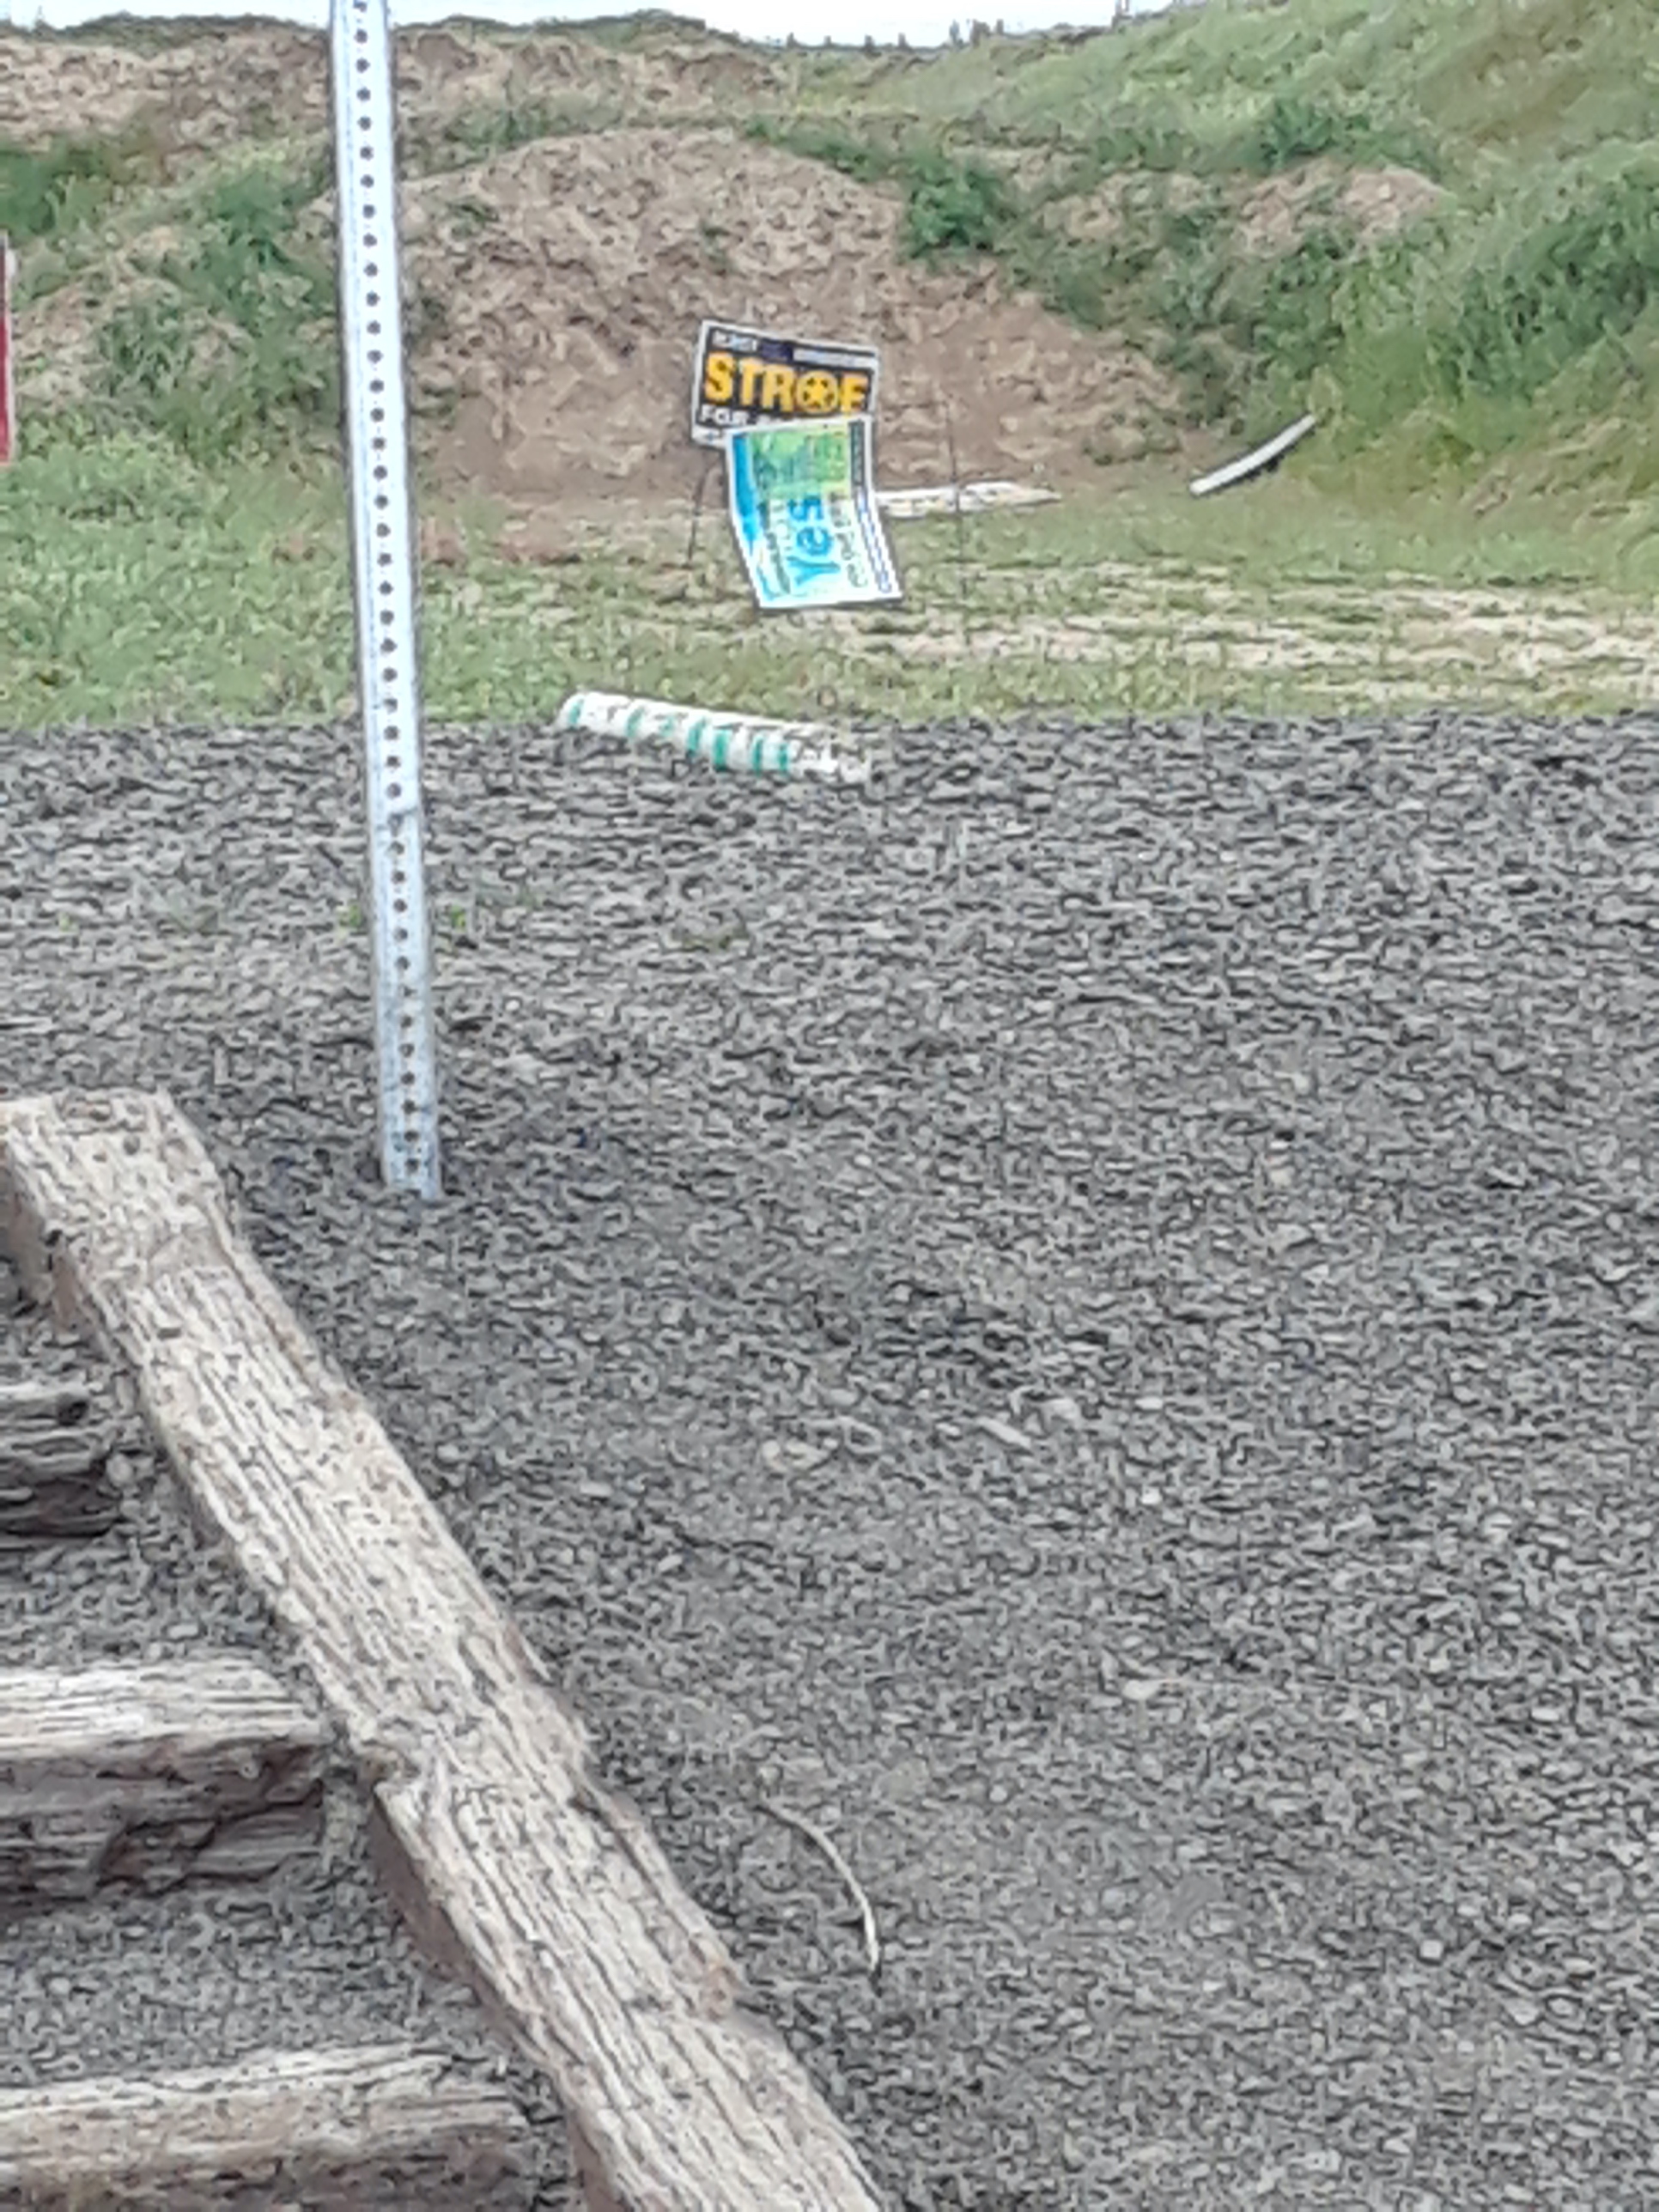 20 yd targets are not allowed on the Action Range